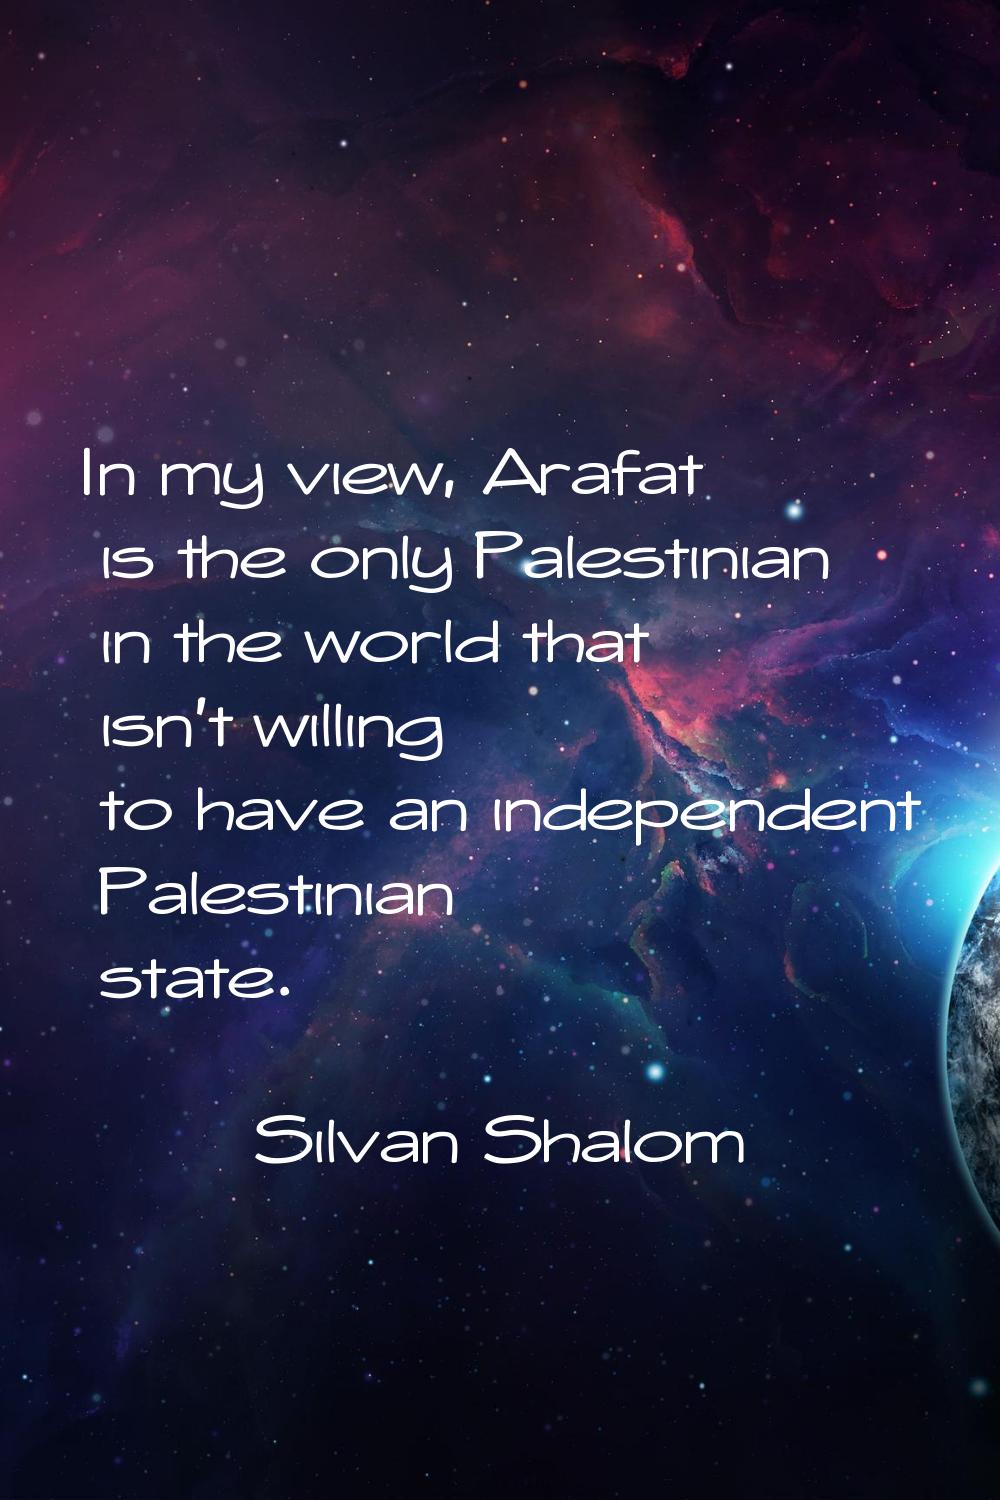 In my view, Arafat is the only Palestinian in the world that isn't willing to have an independent P